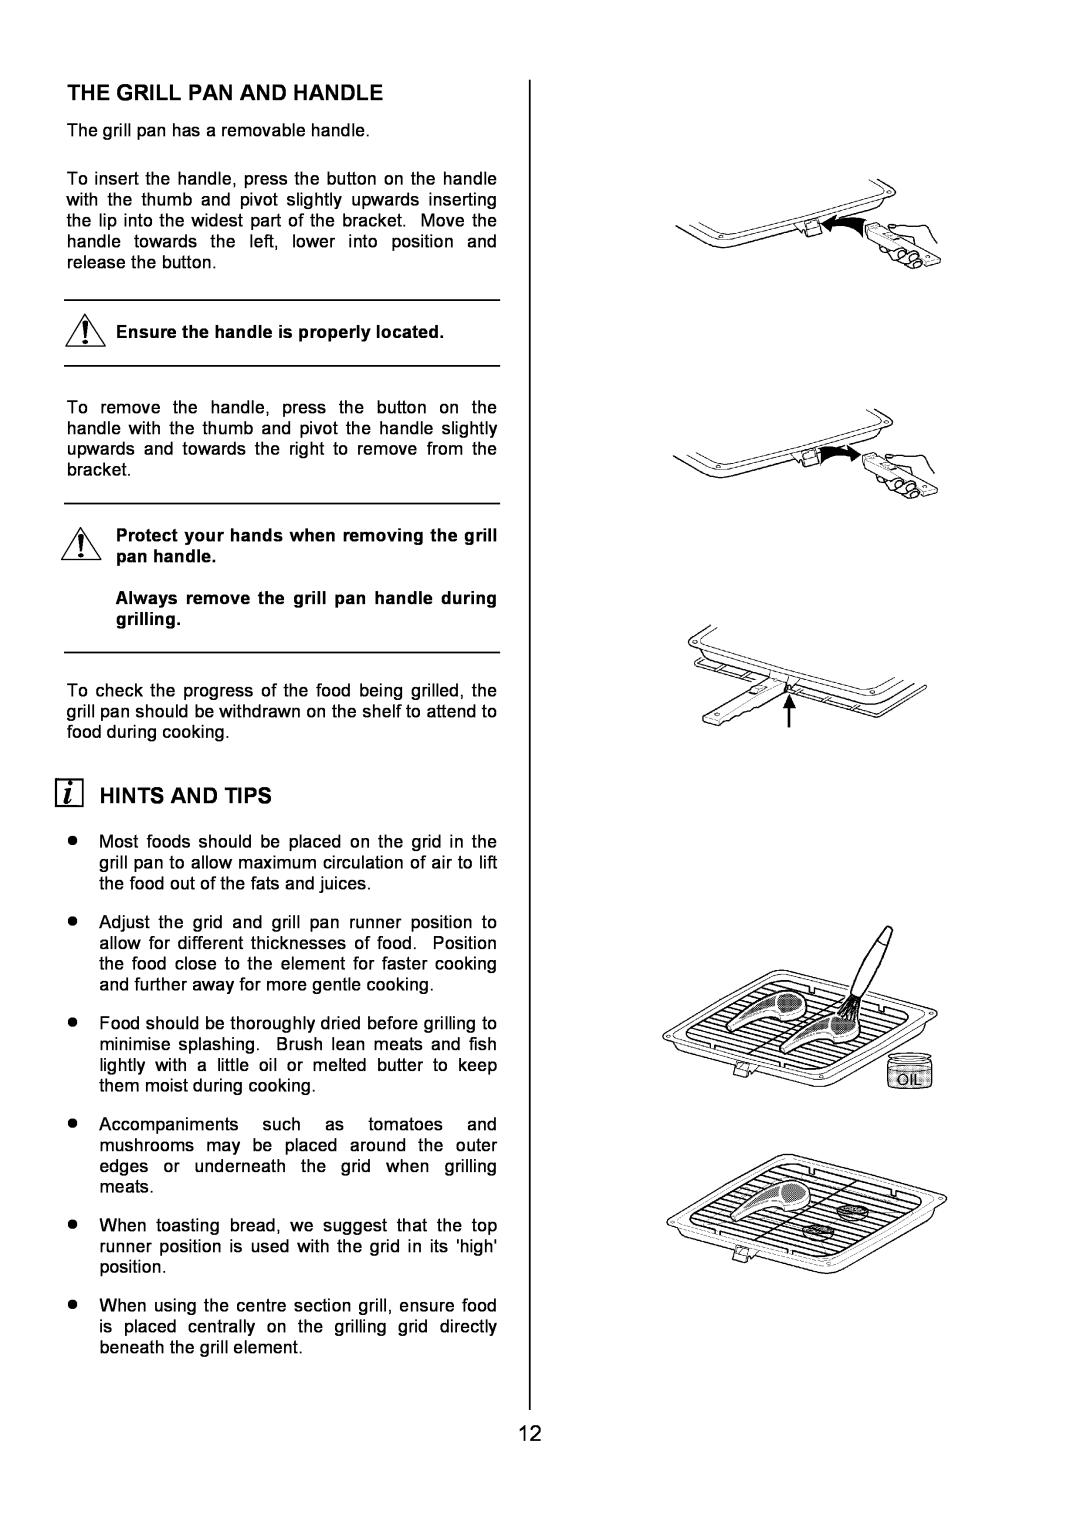 AEG U3100-4 manual The Grill Pan And Handle, Hints And Tips, Ensure the handle is properly located 